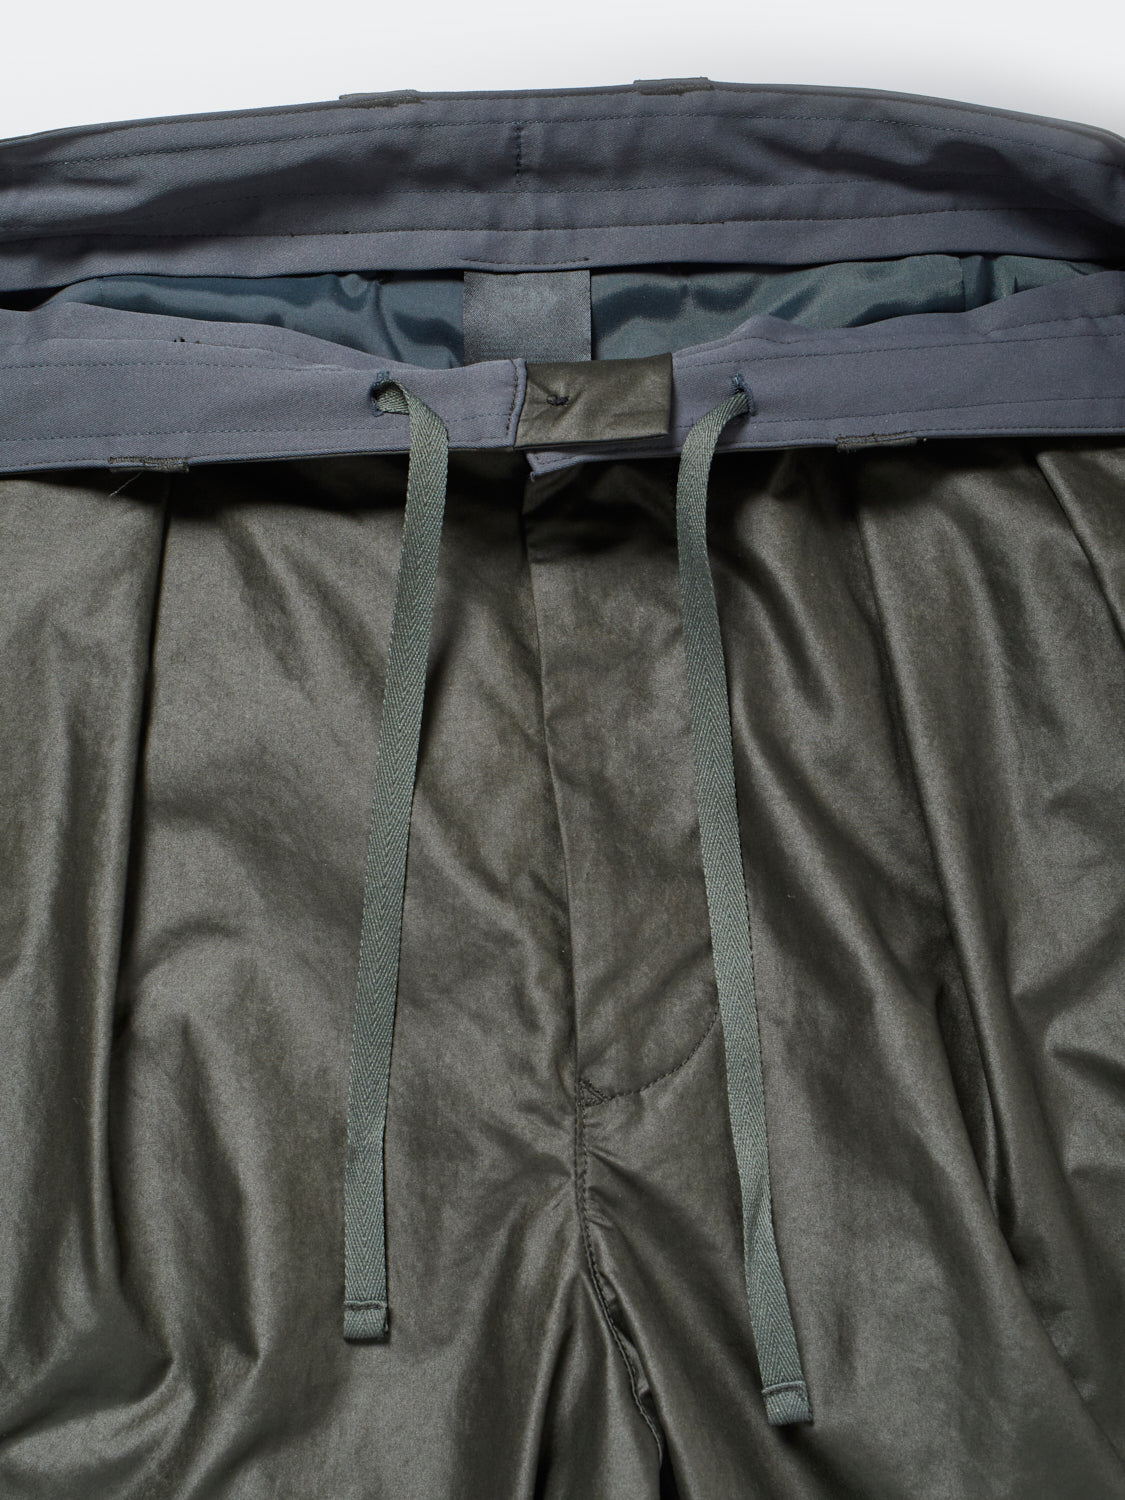 DAIWA PIER39 TECH MIL OFFICER PANTS – unexpected store